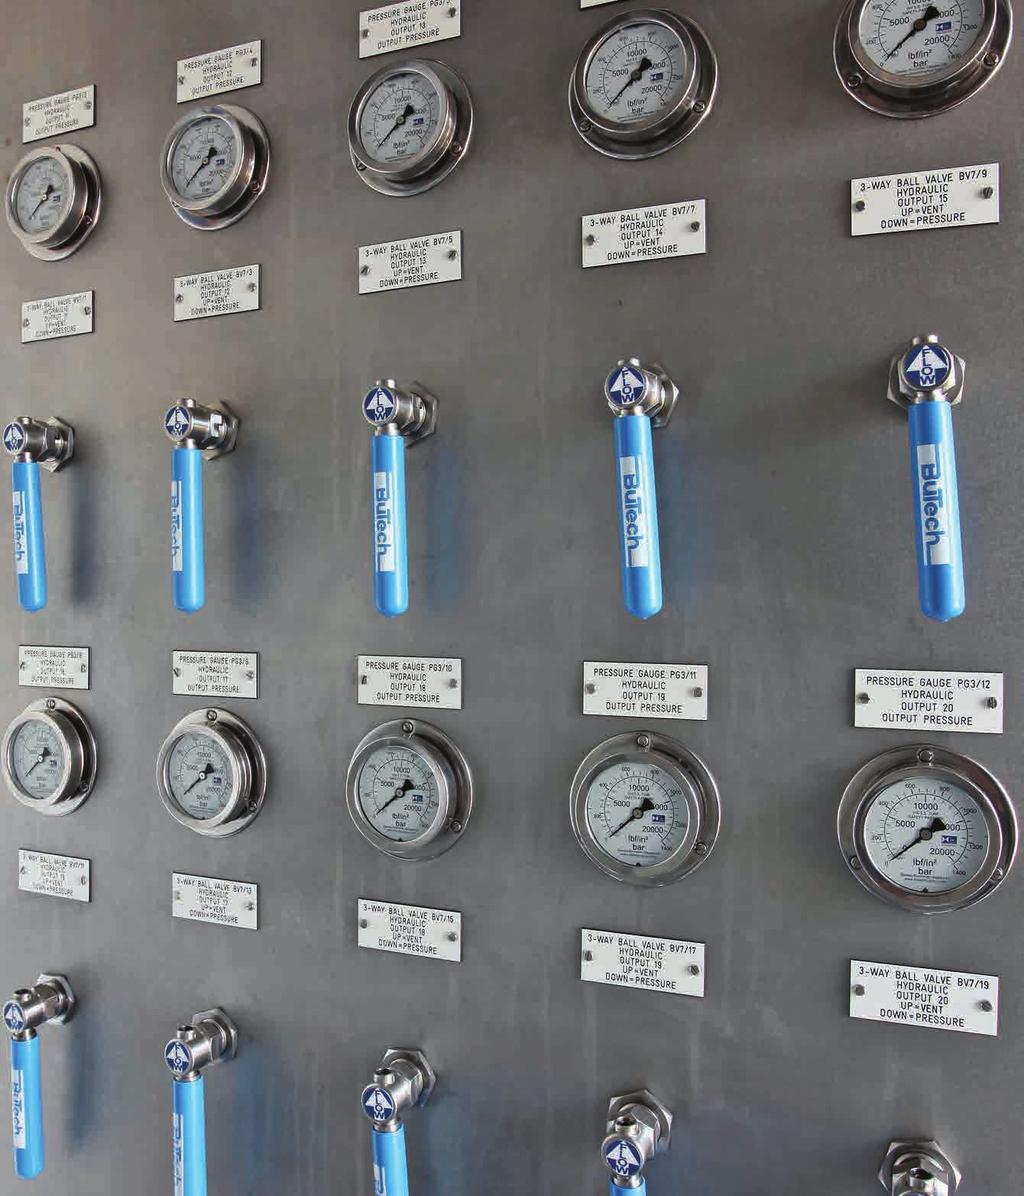 13 Wellhead Control Panels (WHCPs) Wellhead Control Panels (WHCPs) are designed for monitoring, controlling and shutdown of Subsurface Controlled Safety Valves (SCSSV), Surface Safety Valves (SSV),